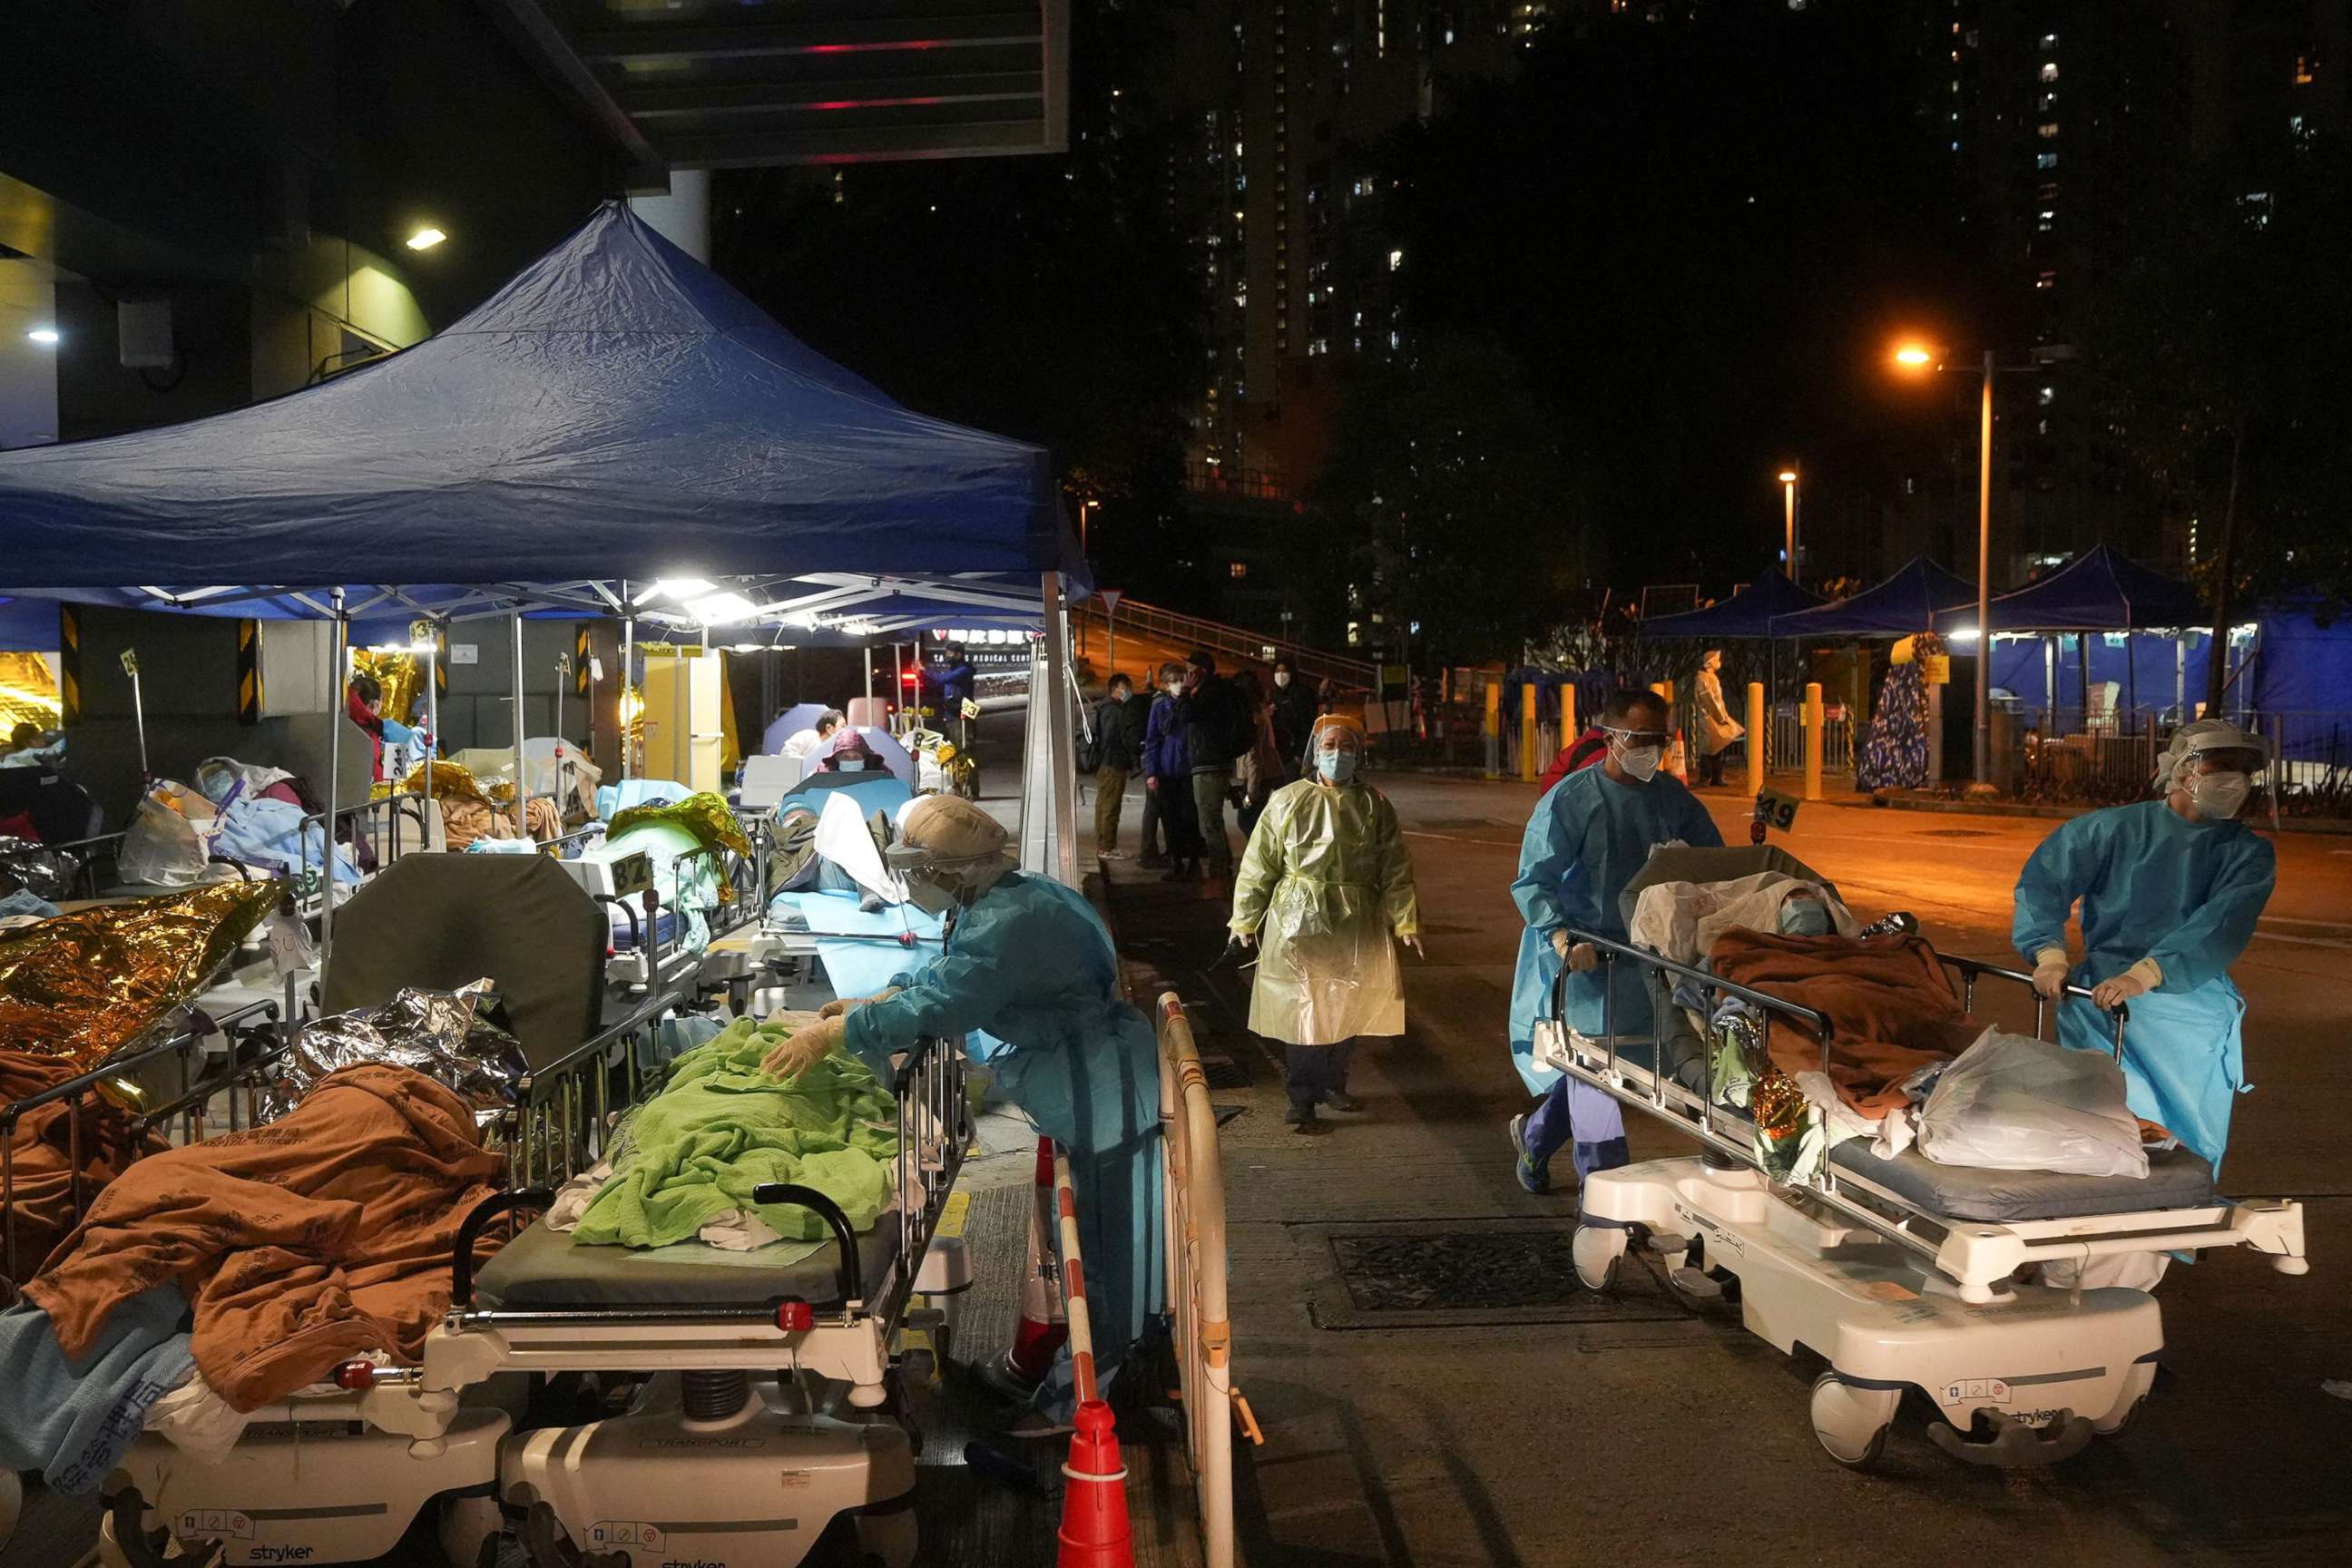 PHOTO: Medical workers tend to patients at a makeshift treatment area outside a hospital, during COVID-19 outbreak in Hong Kong, Feb. 17, 2022.